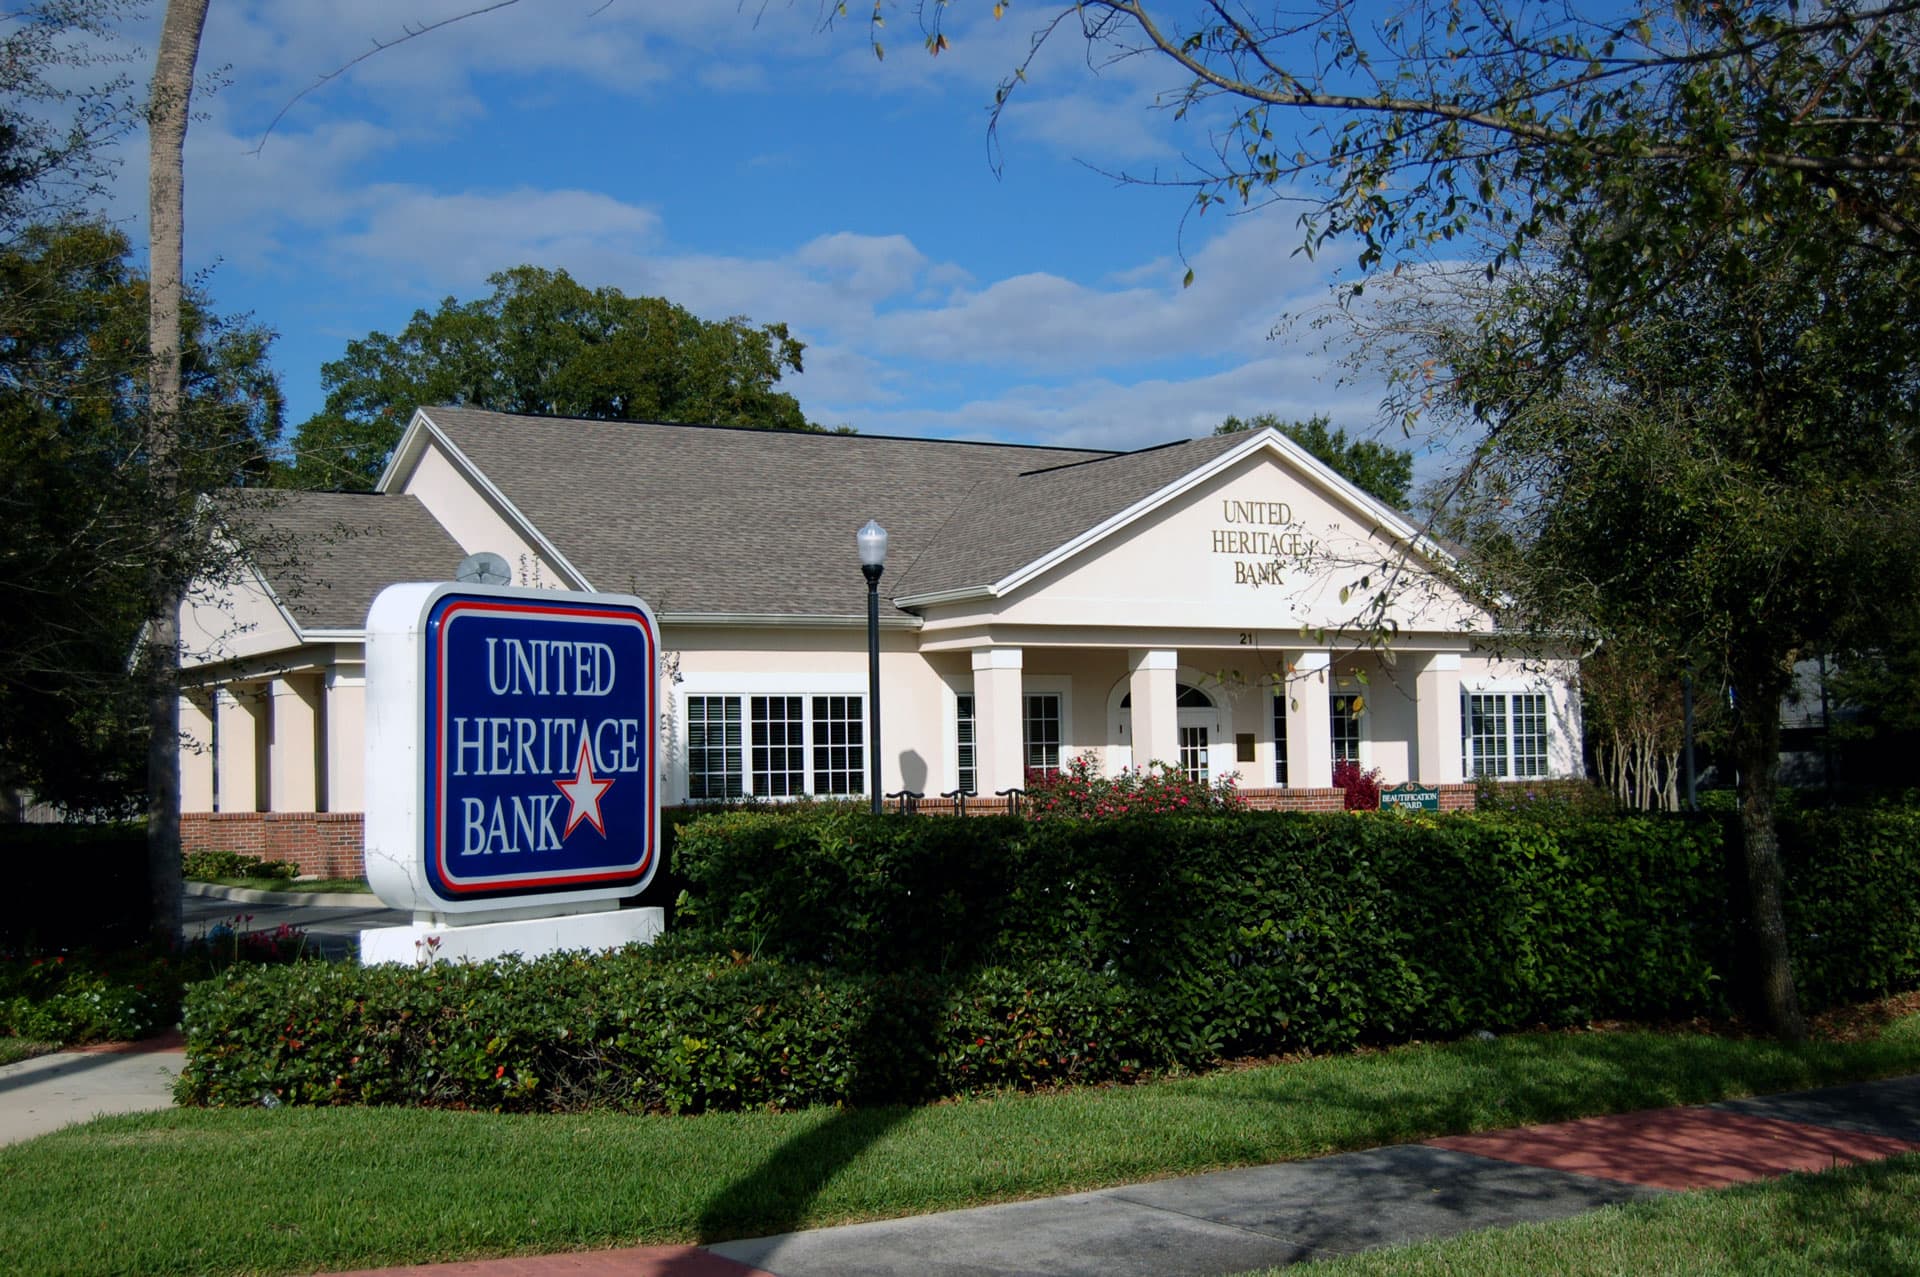 New construction and addition to the United Heritage Bank in Apopka